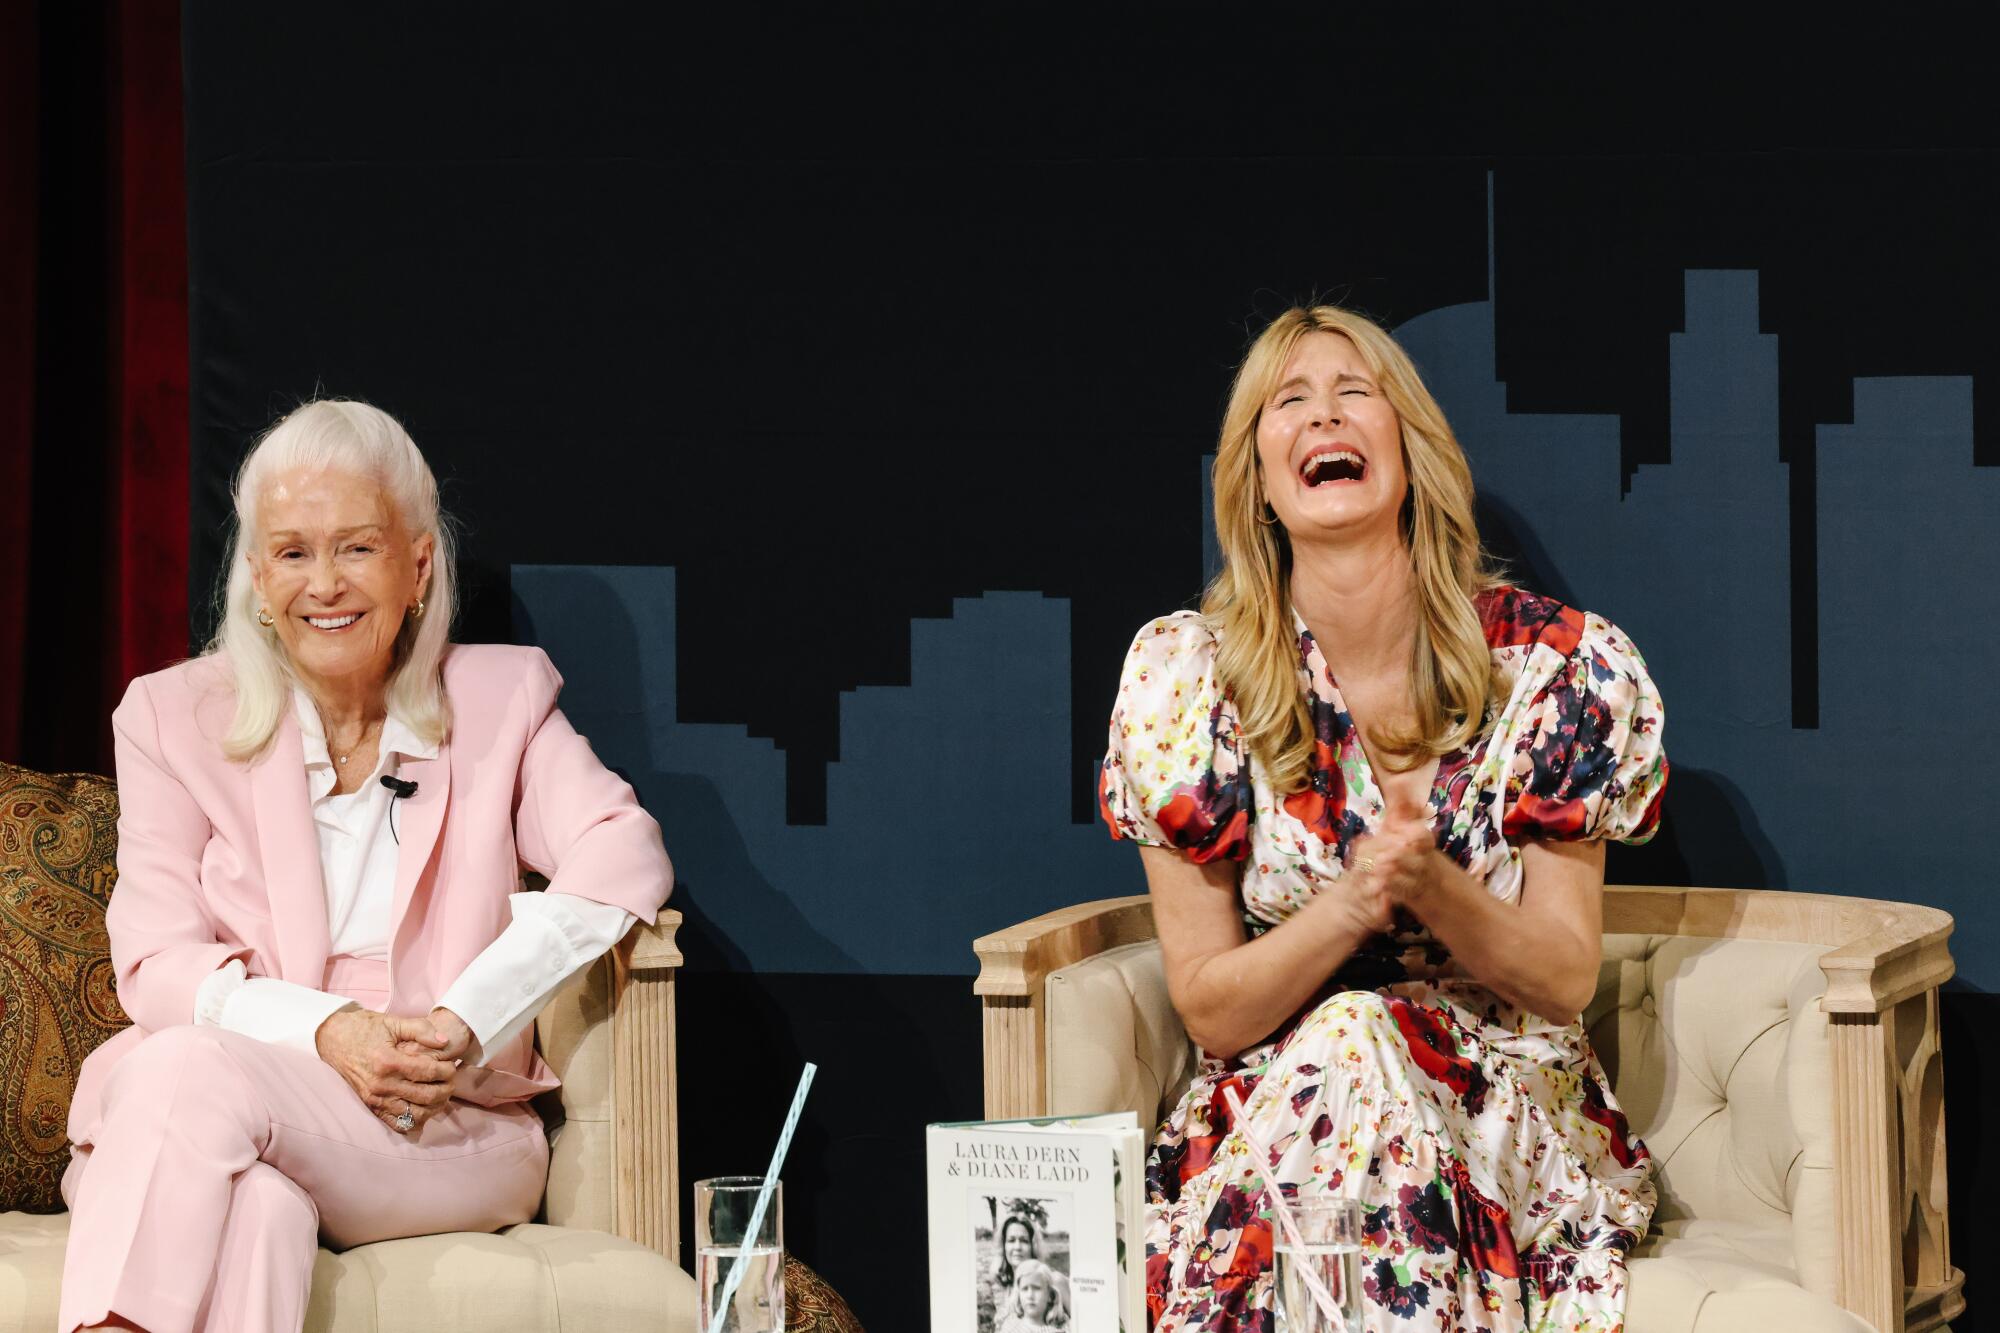 Actors Diane Ladd, left, and her daughter Laura Dern onstage during the Festival of Books.